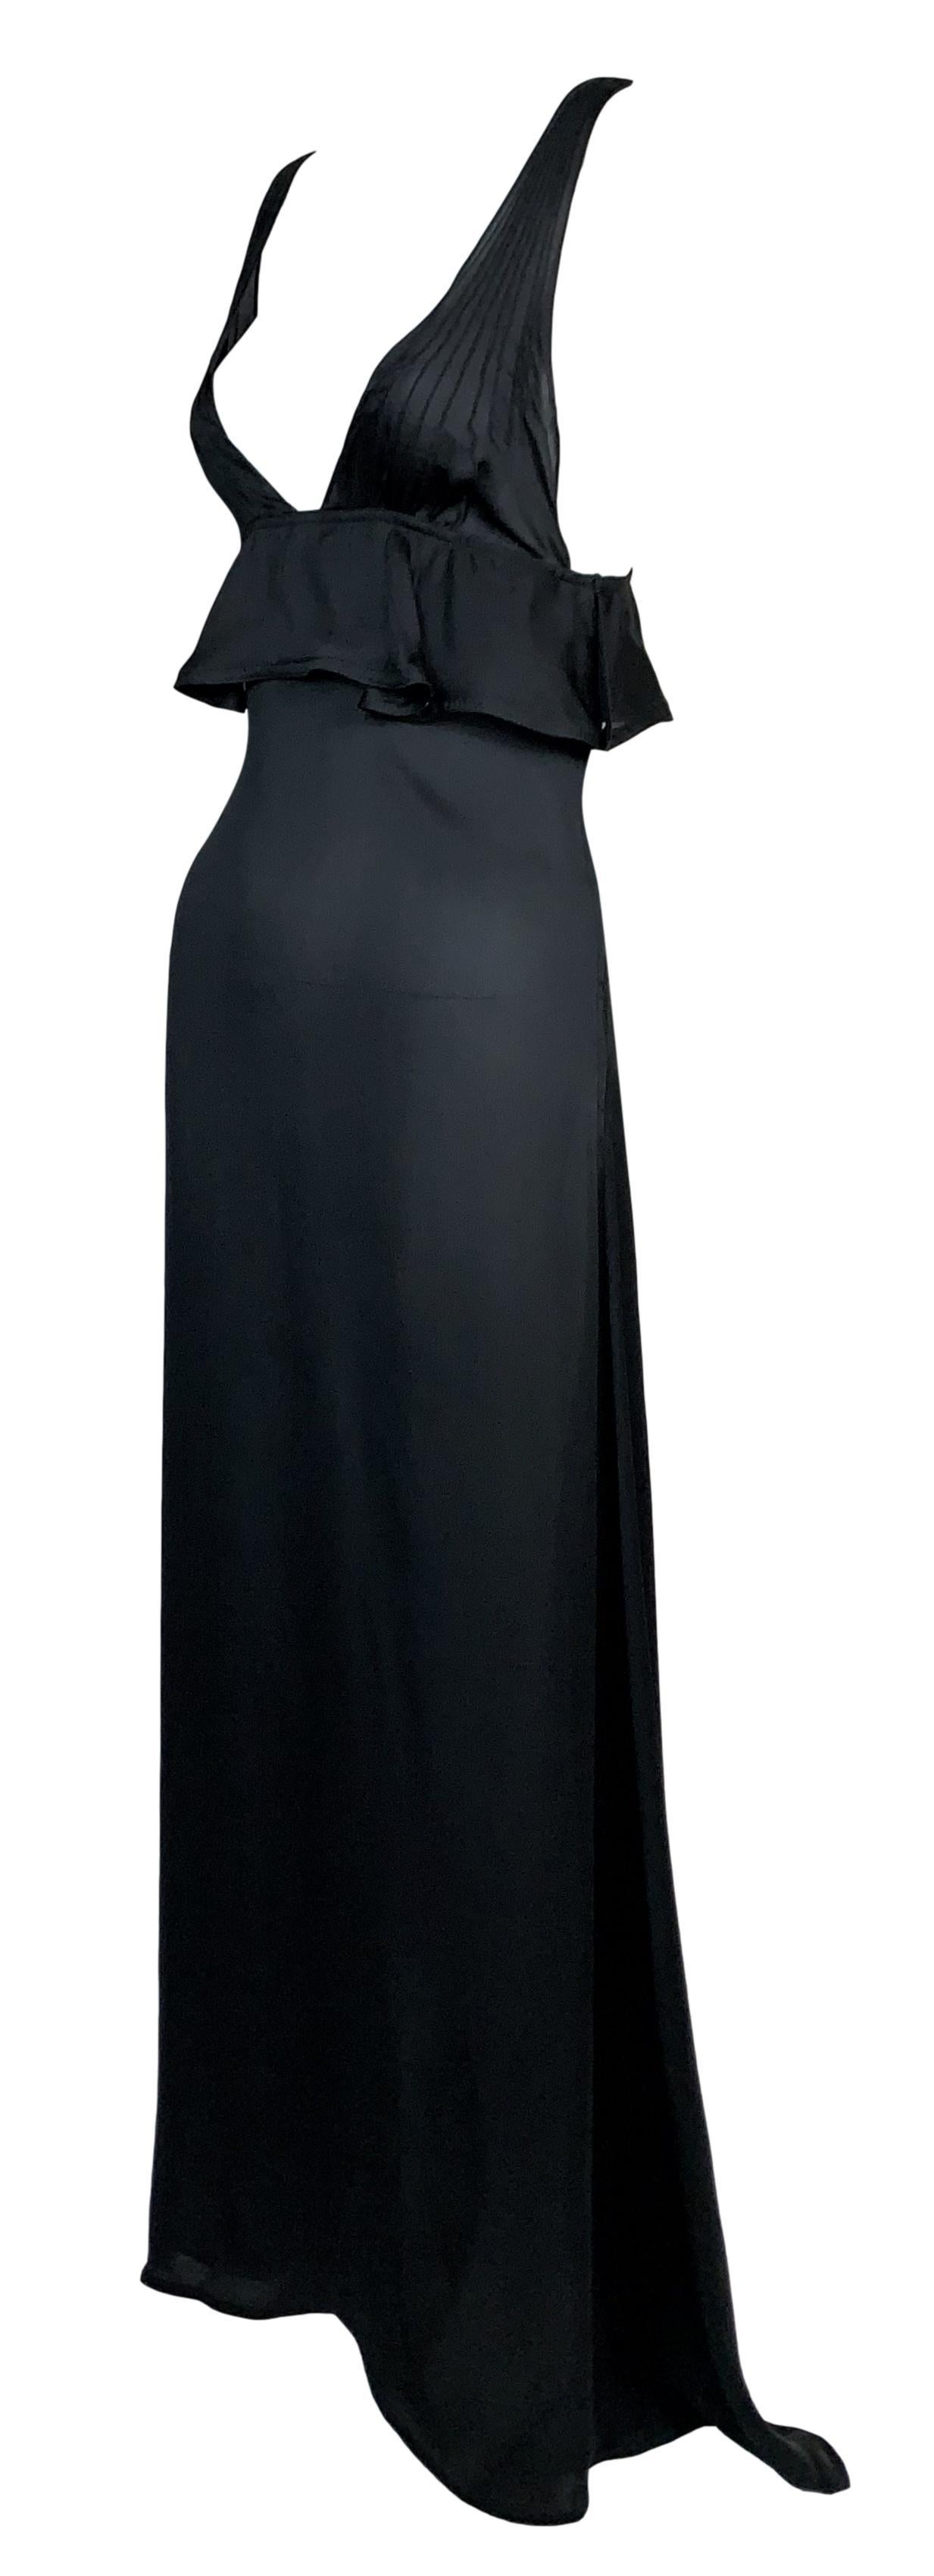 F/W 2003 Yves Saint Laurent Tom Ford Runway Sheer Black Silk Plunging Gown Dress In Good Condition In Yukon, OK